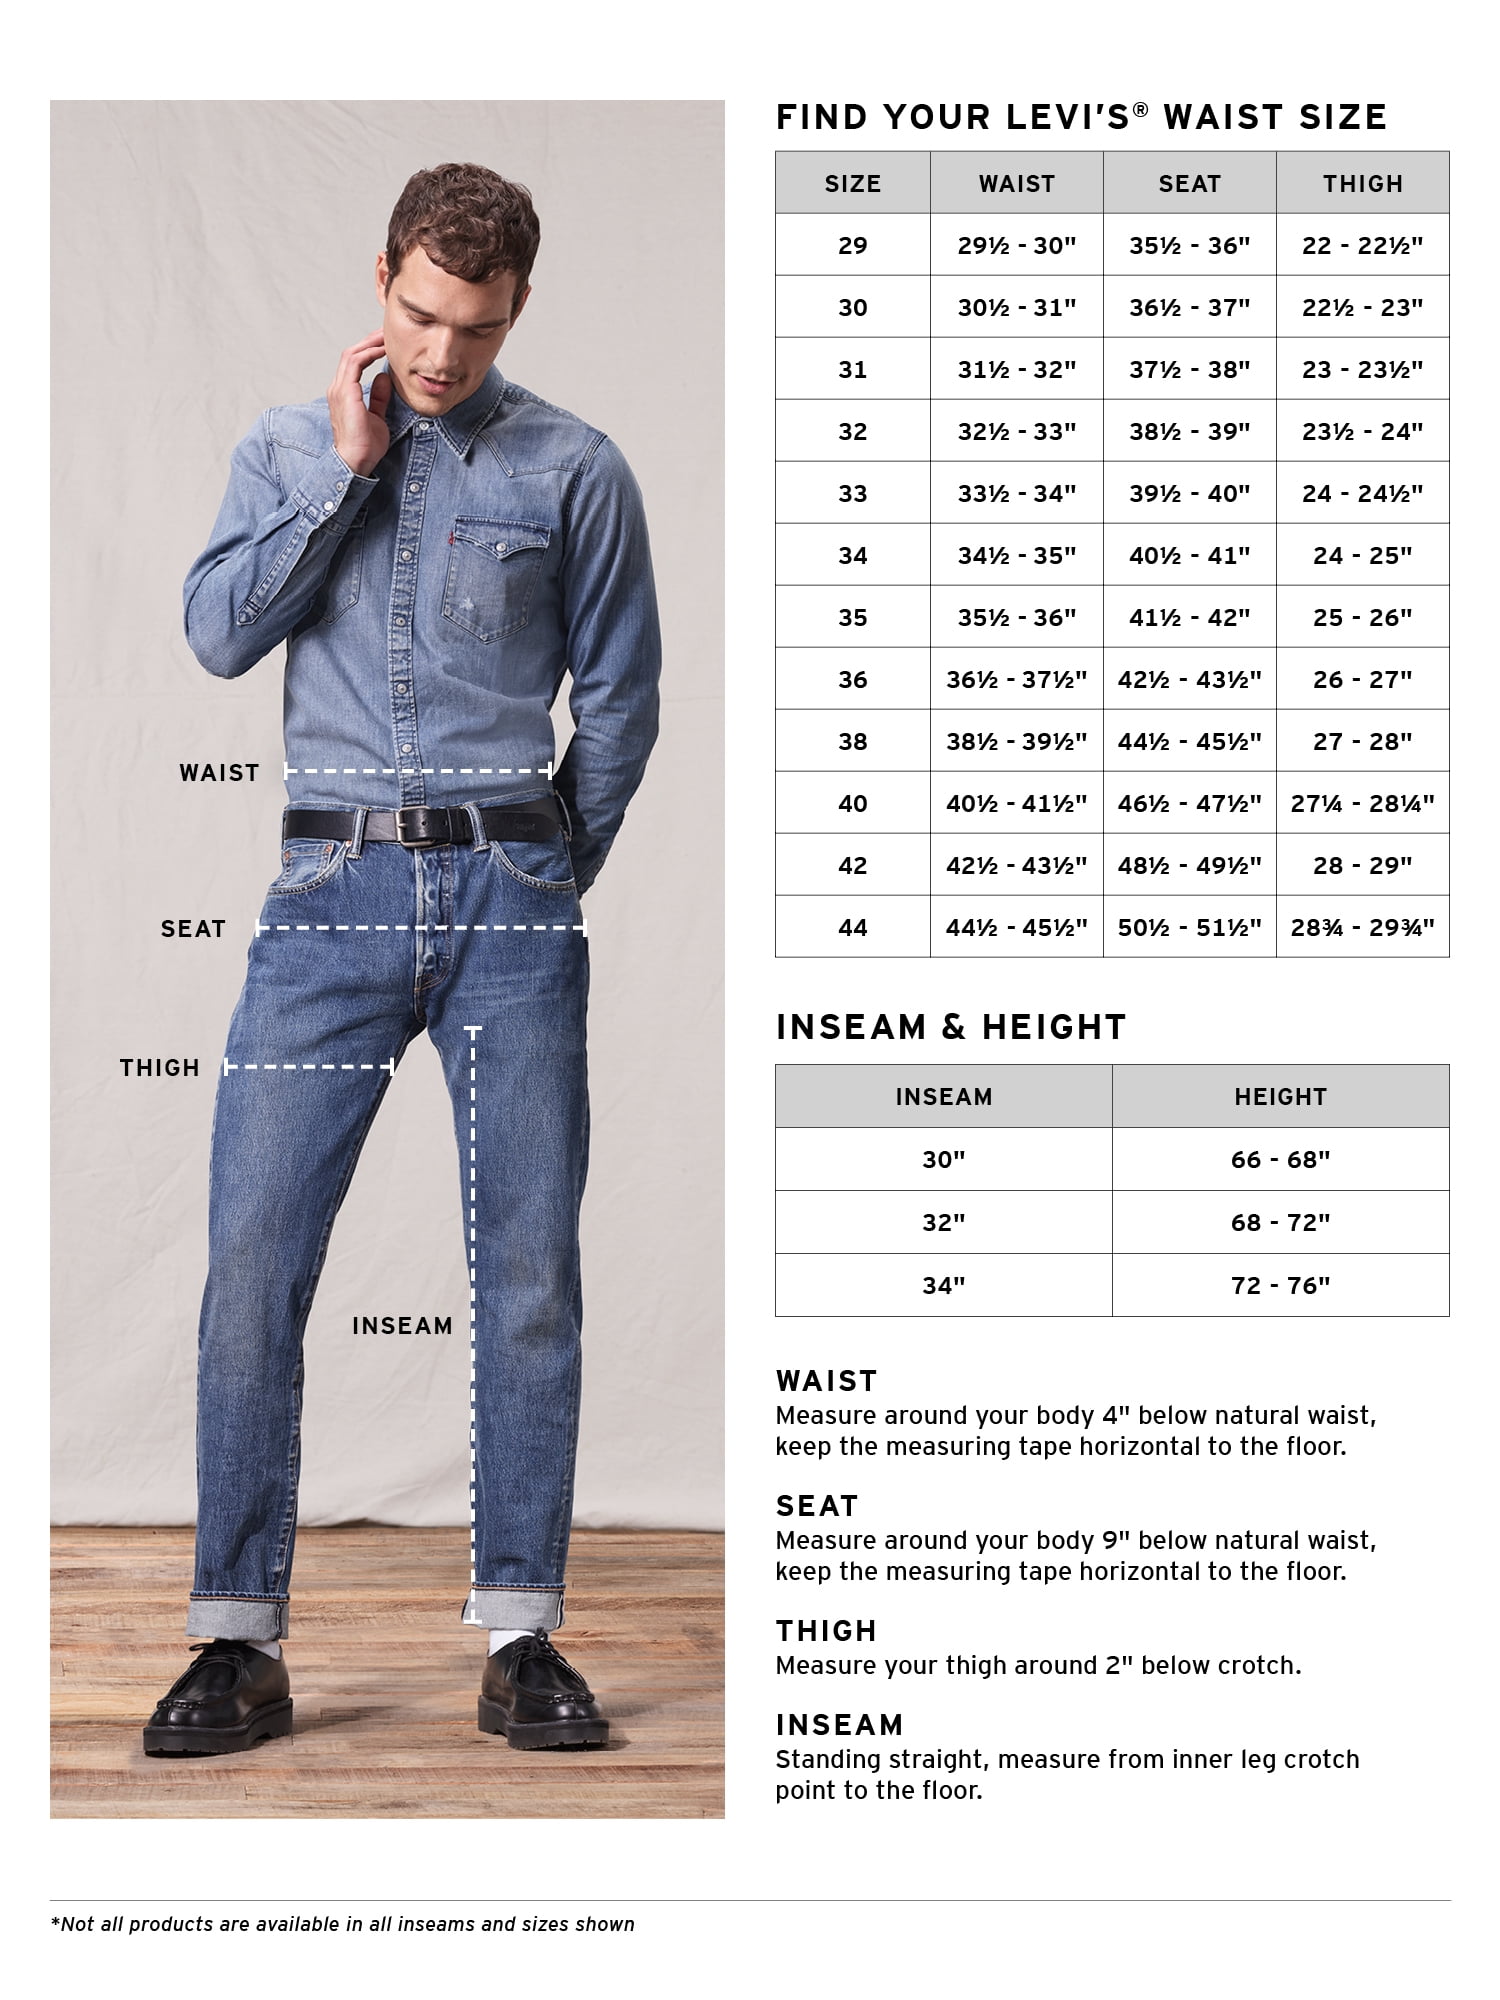 where to buy levi's 501 jeans near me